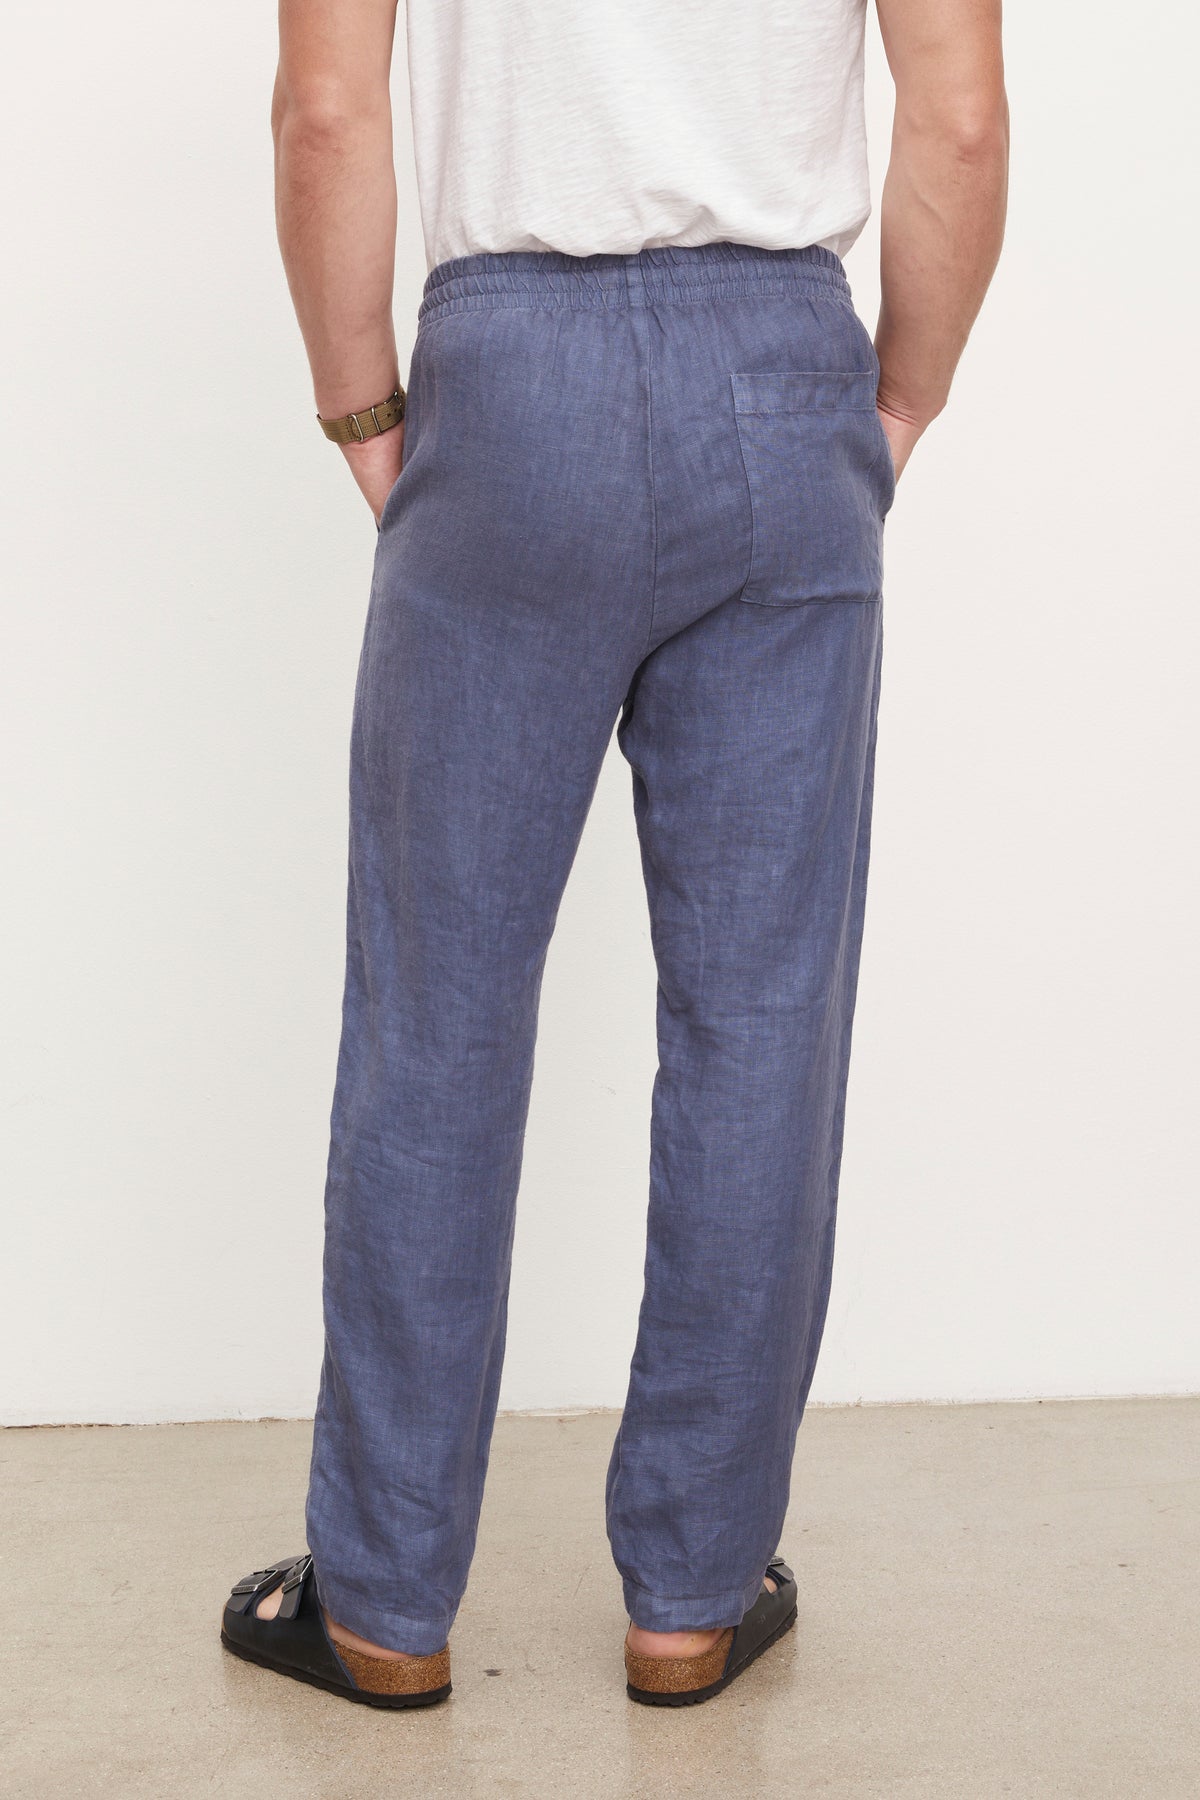 Rear view of a person in a white top and blue relaxed fit Velvet by Graham & Spencer Phelan Linen Pant, standing in a room with white walls.-36805503451329